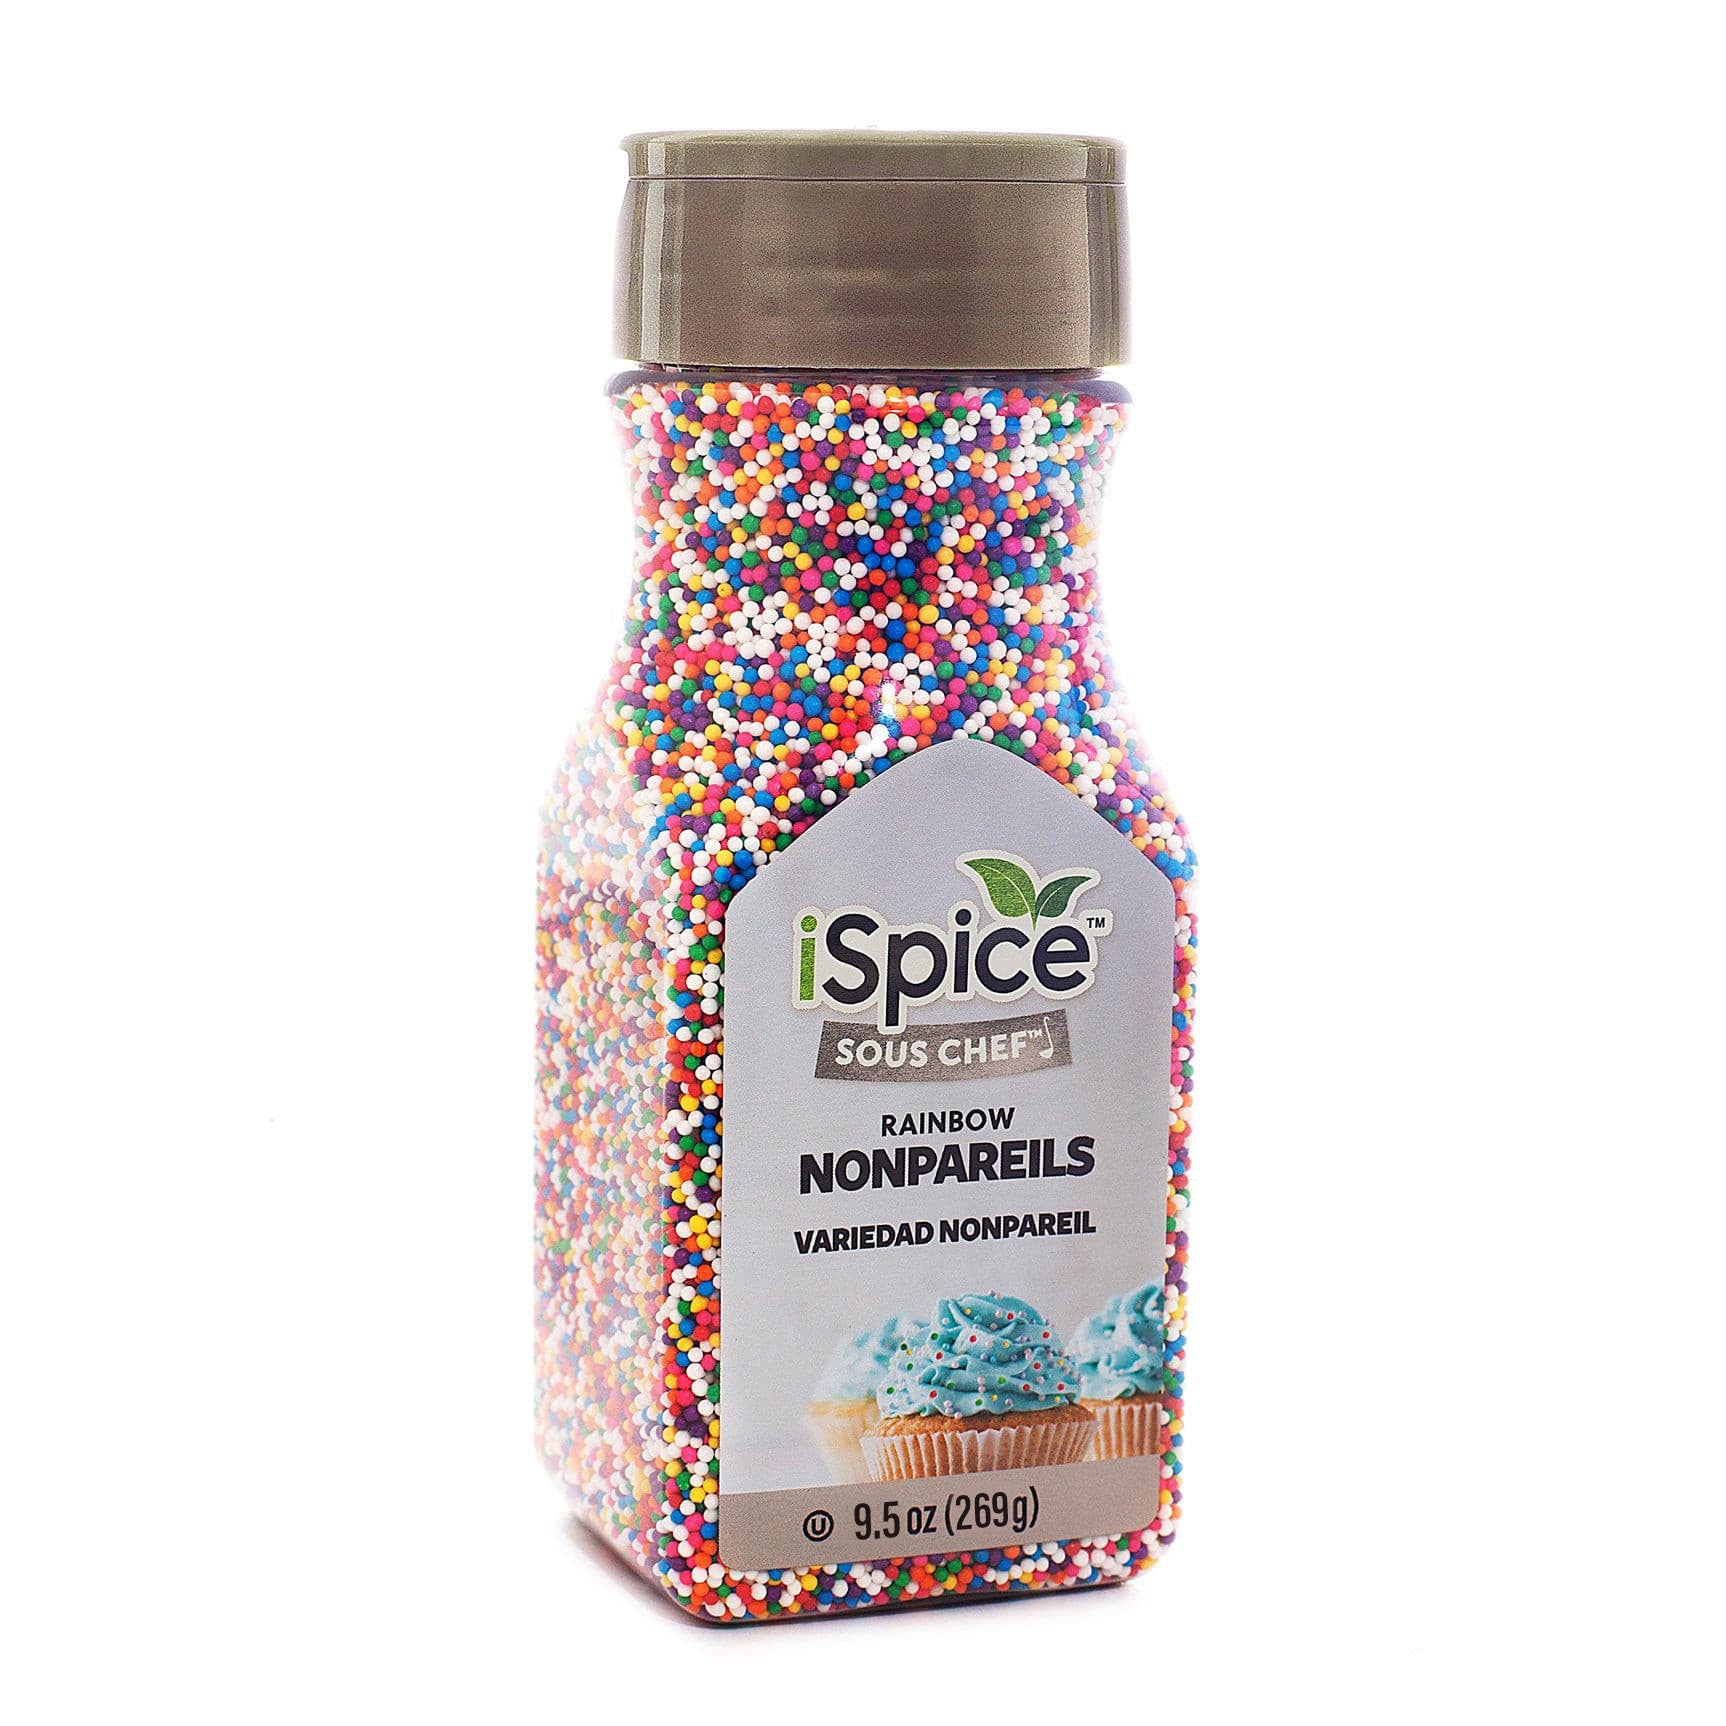 Rainbow Nonpareil Sprinkles - Your Ultimate Guide 